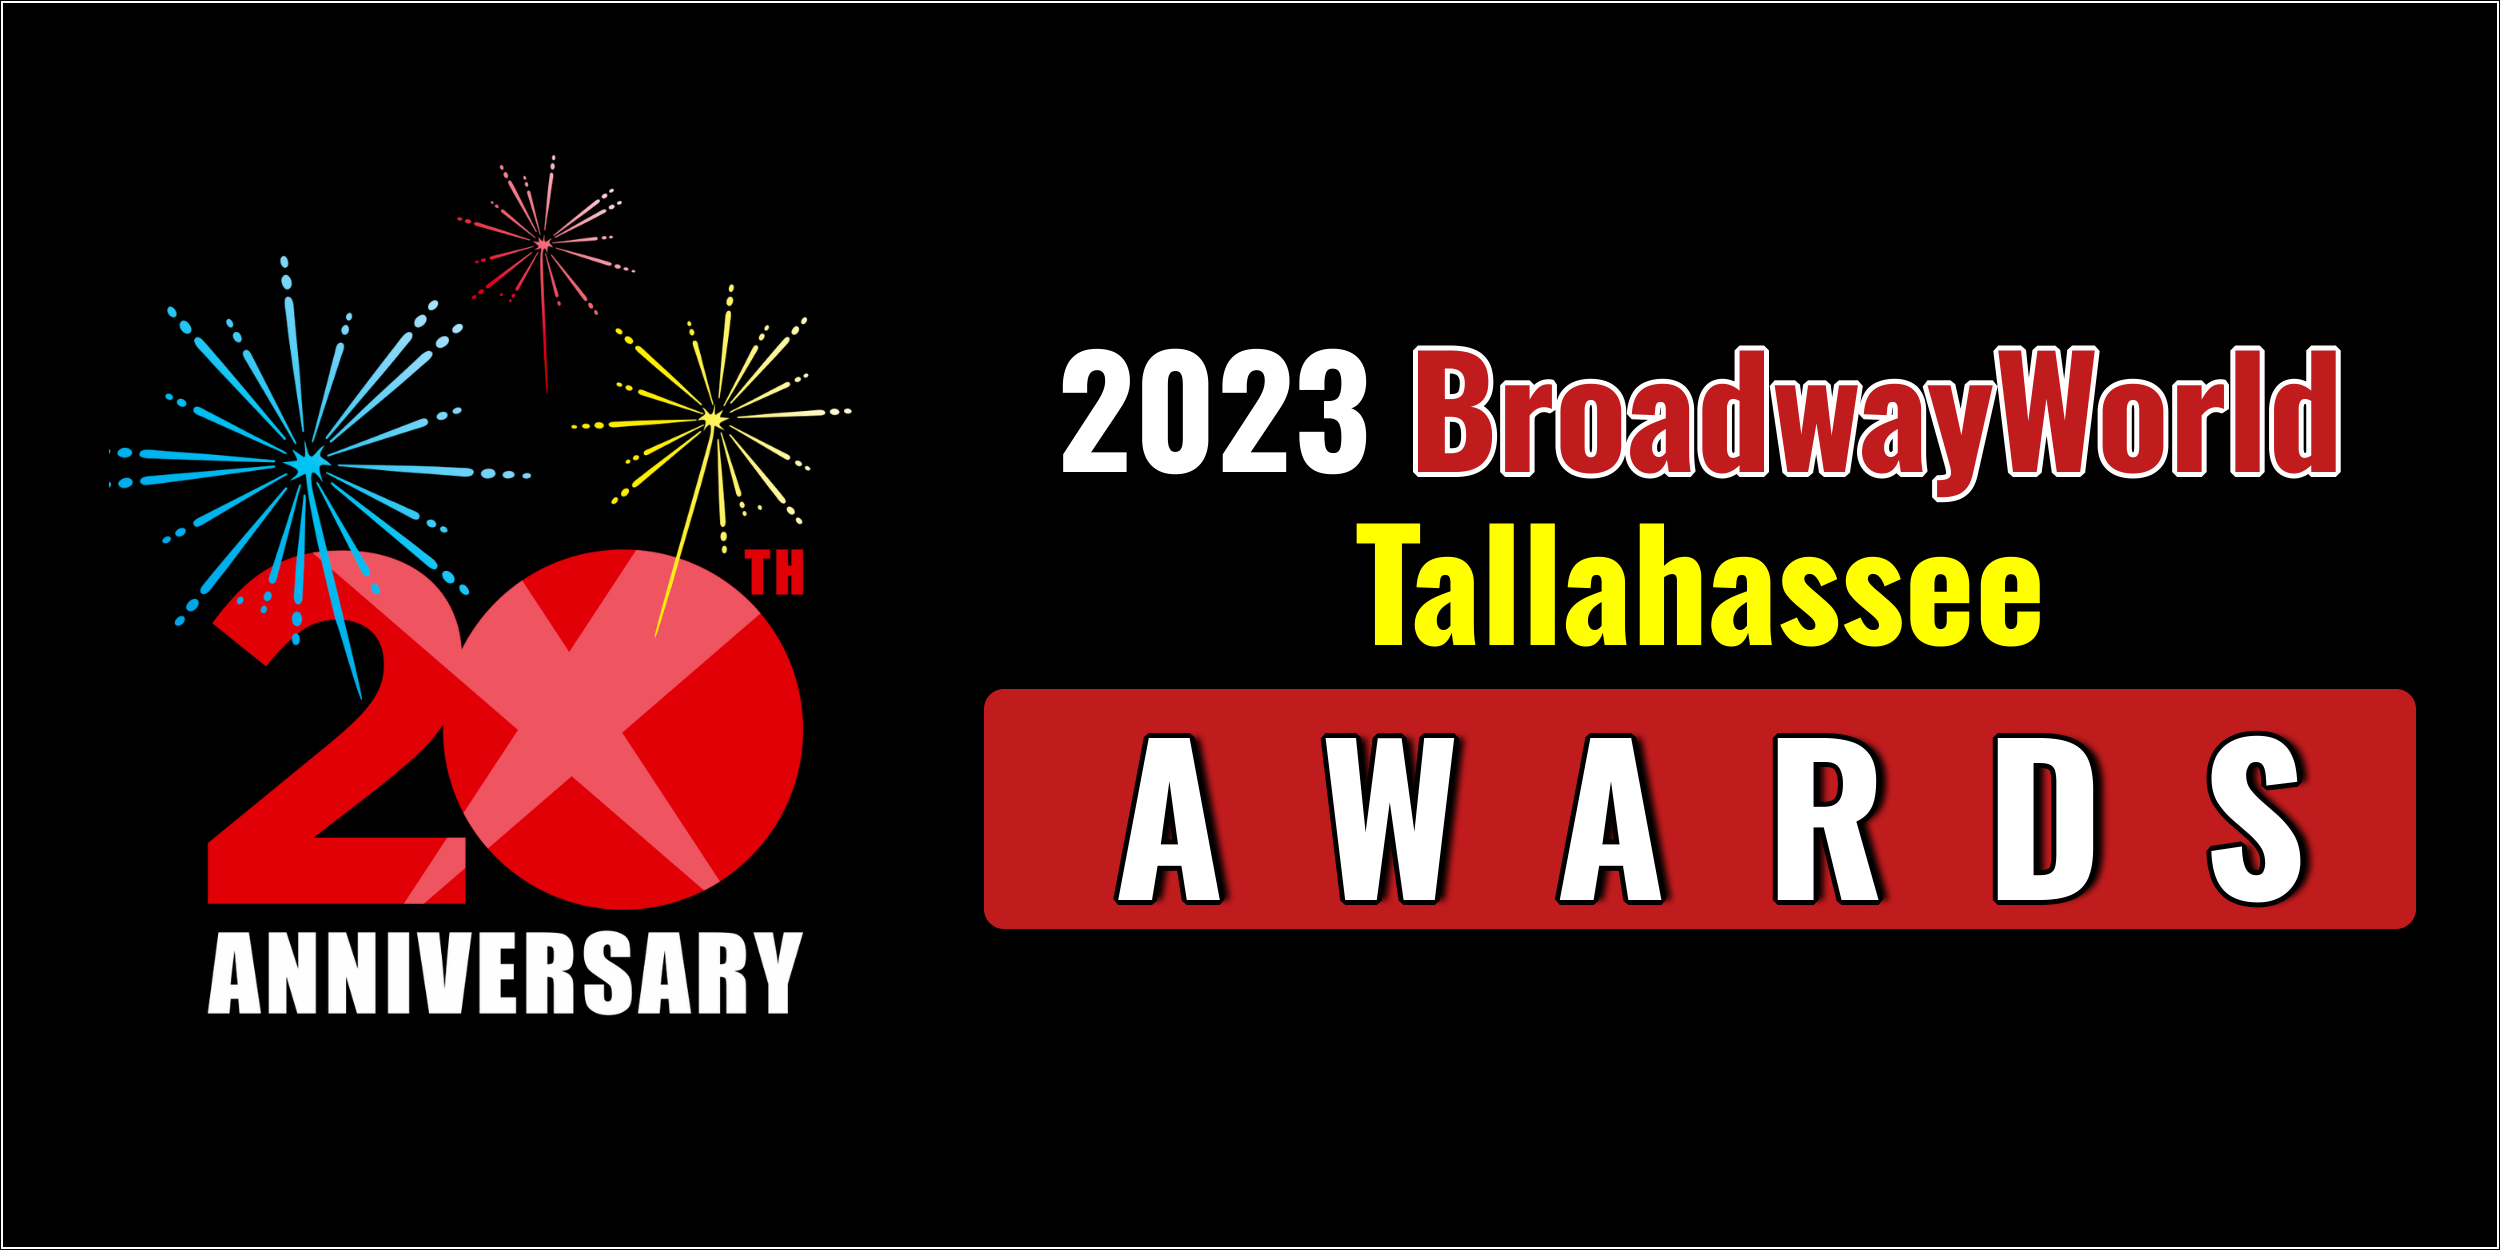 Latest Standings Announced For The 2023 BroadwayWorld Tallahassee Awards; SPAMALOT Leads Best Musical! 